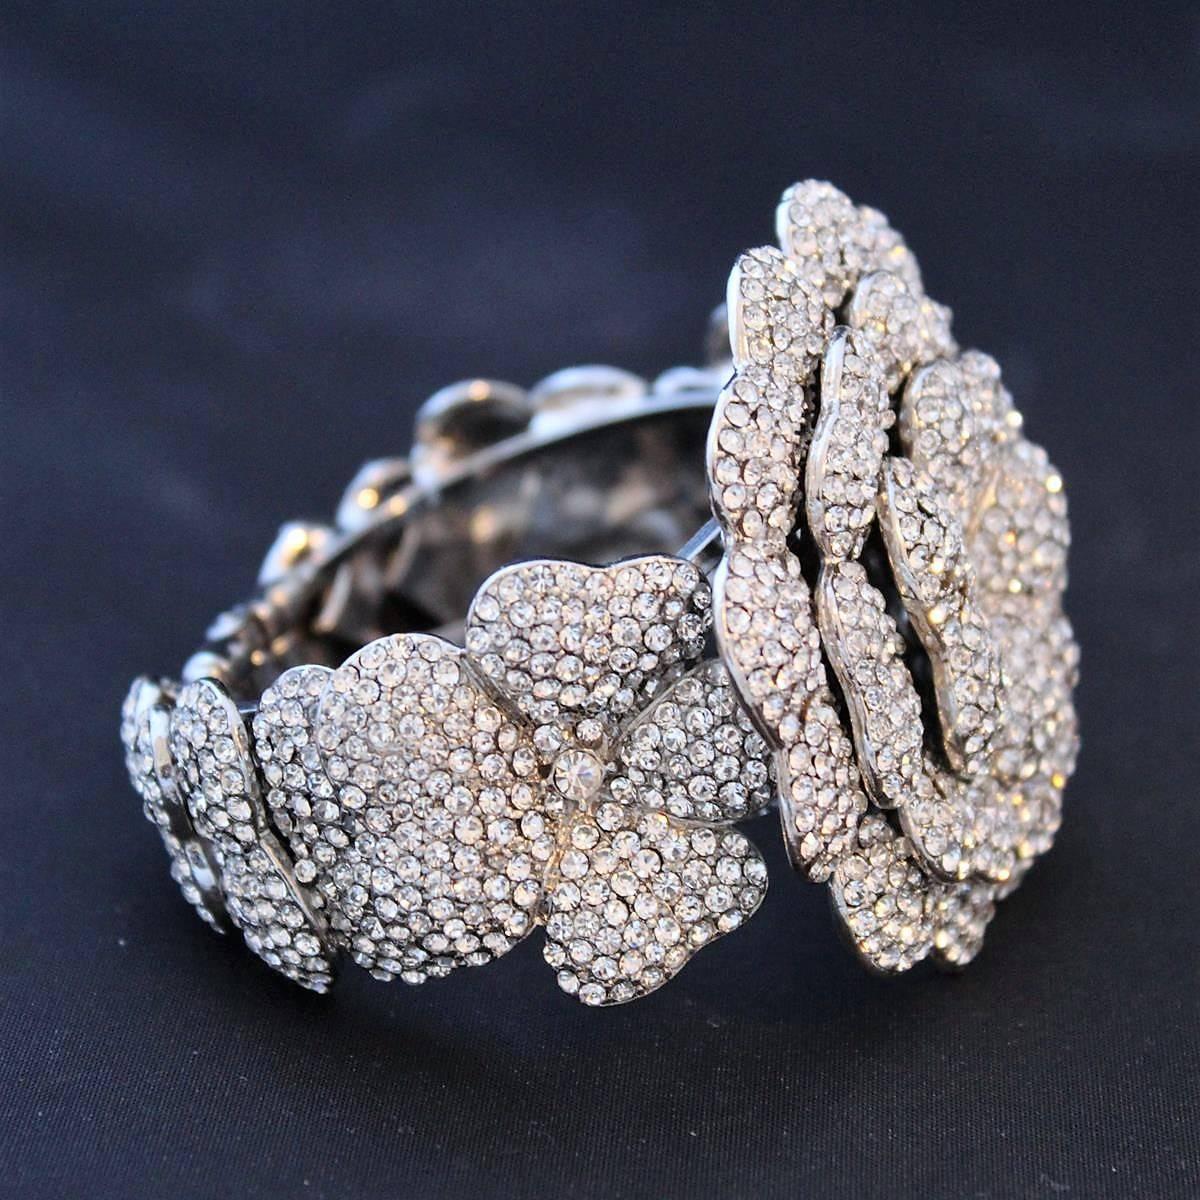 Stunning piece by Carlo Zini Milano
One of the greatest world fashion jewelry designers
Non allergenic rhodium
Amazing hand creation of class A swarovsky crystals
Total width cm 6,5 (2.55 inches)
Wrist cm 17 (6.69 inches)
100% Artisanal work made in